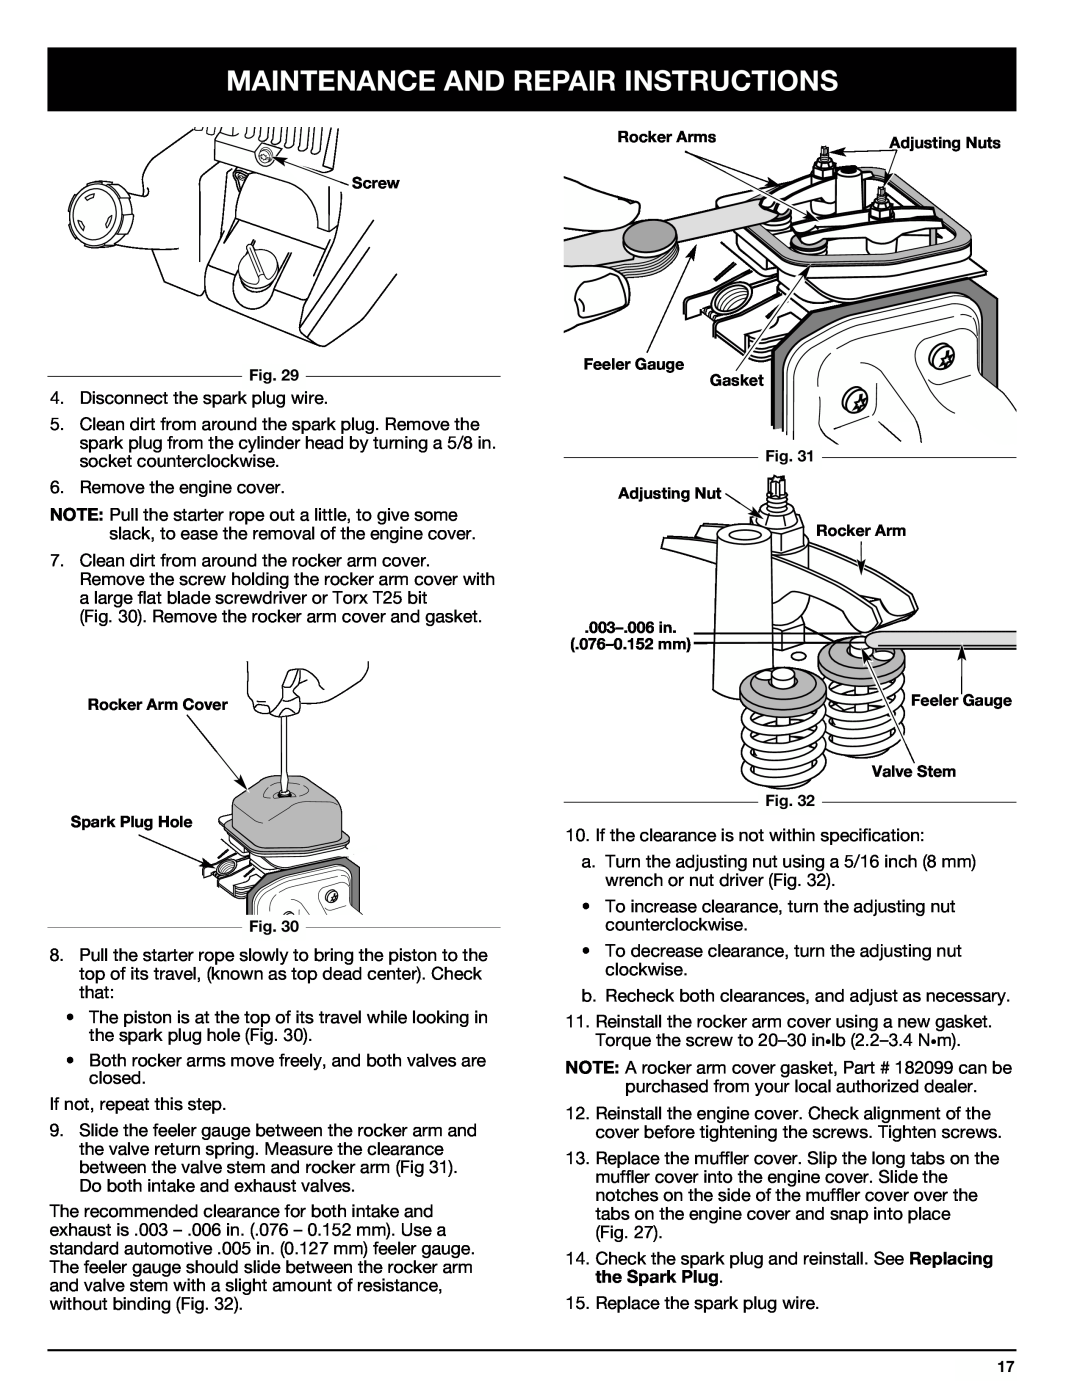 Ryobi Outdoor 510r manual Maintenance And Repair Instructions, Disconnect the spark plug wire 